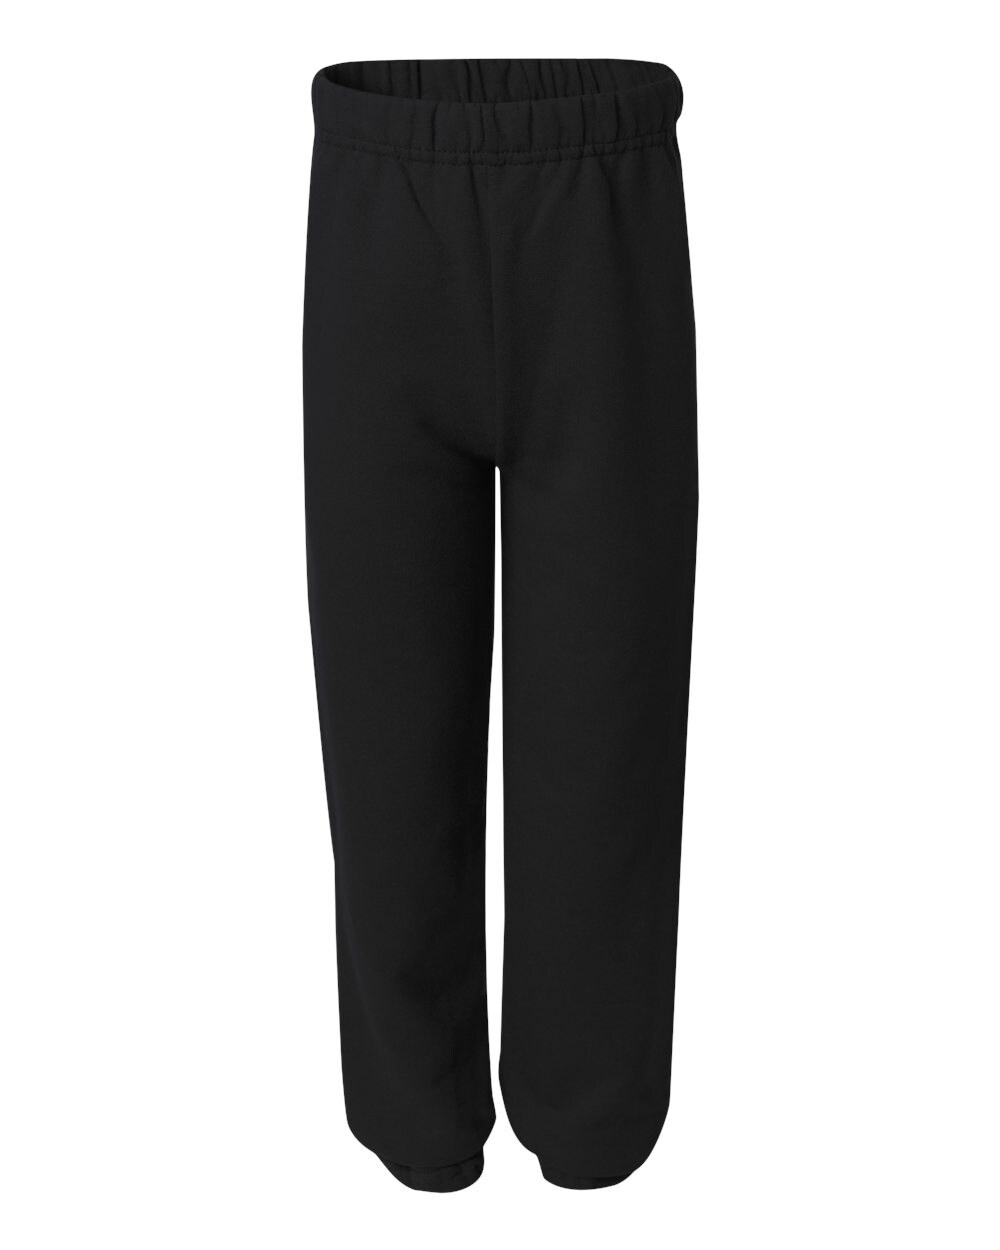 JERZEES® - NuBlend Youth Sweatpants - 973BR, 8 oz. Cotton/Polyester Blend  for Unmatched Comfort Joggers, Indulge in the luxury of comfort with  JERZEES Sweatpants